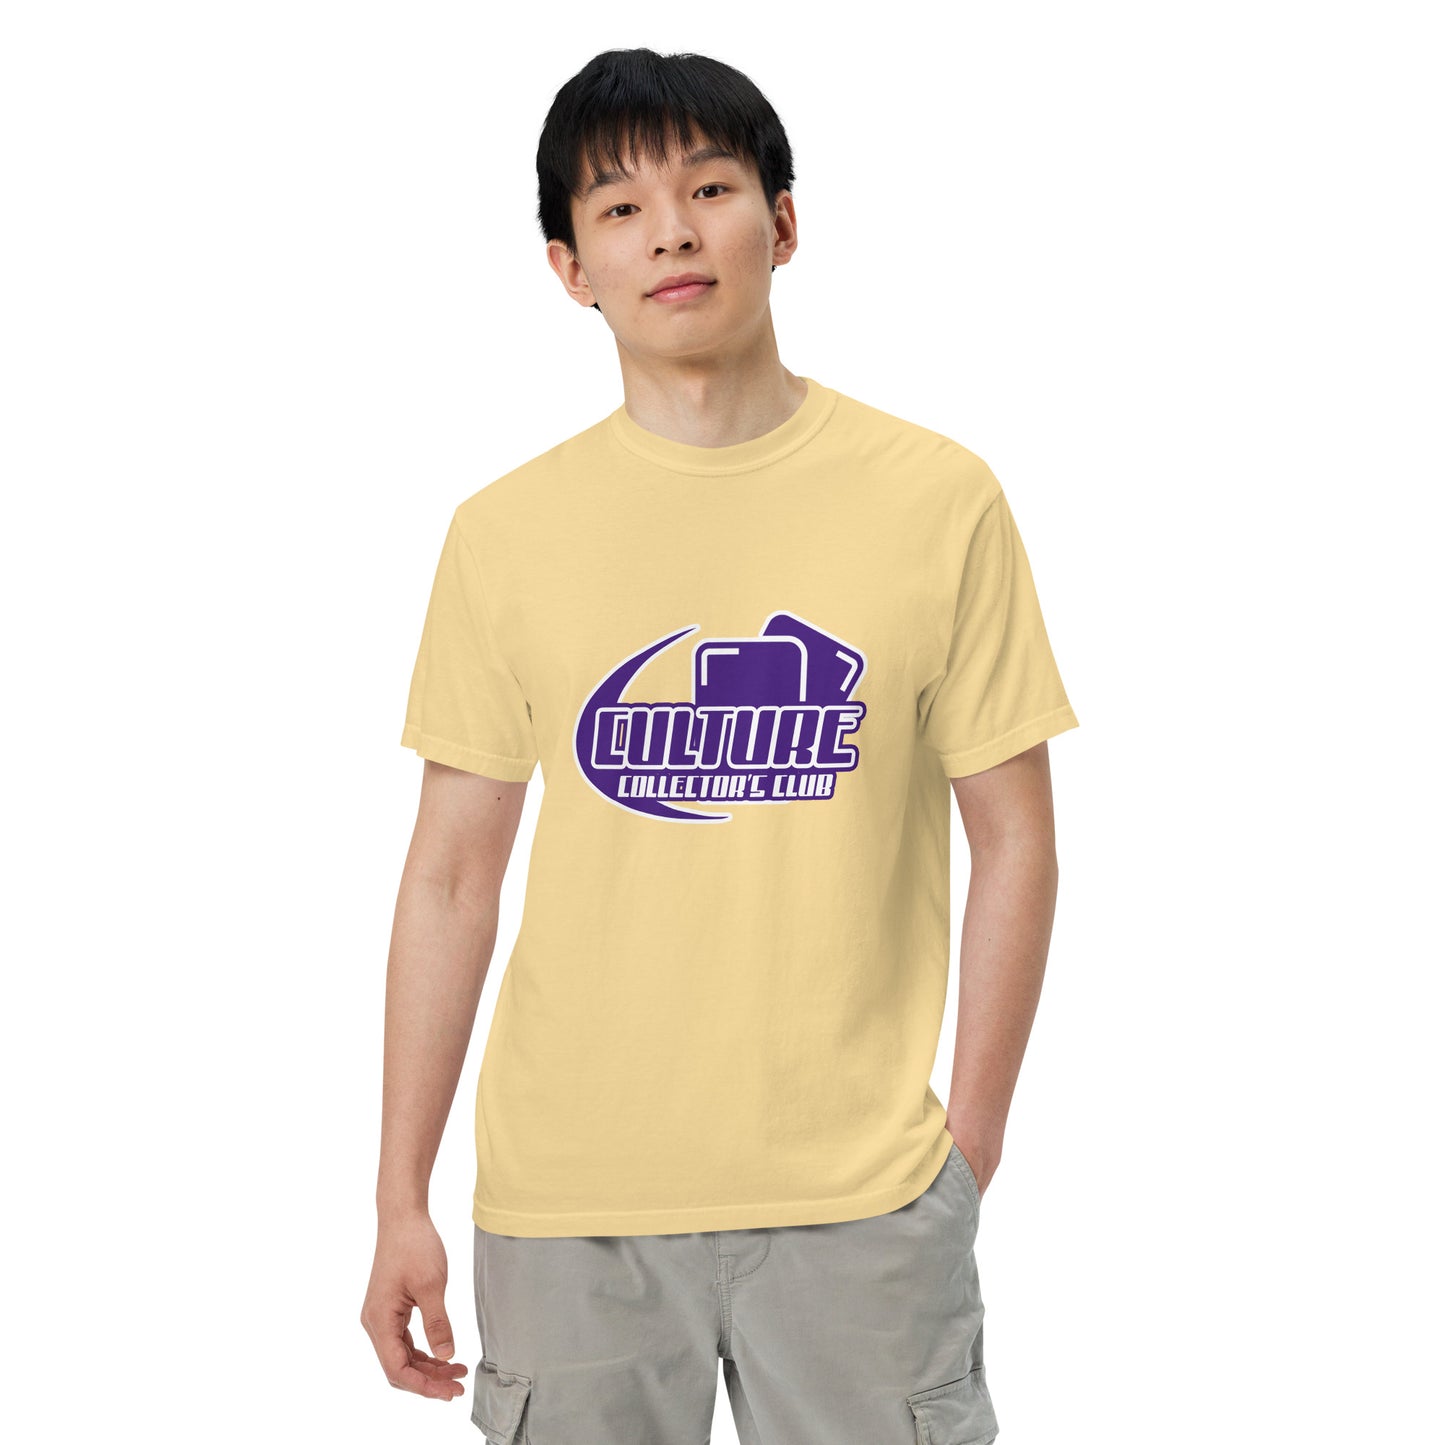 Cards and Culture Collector's Club T-Shirt